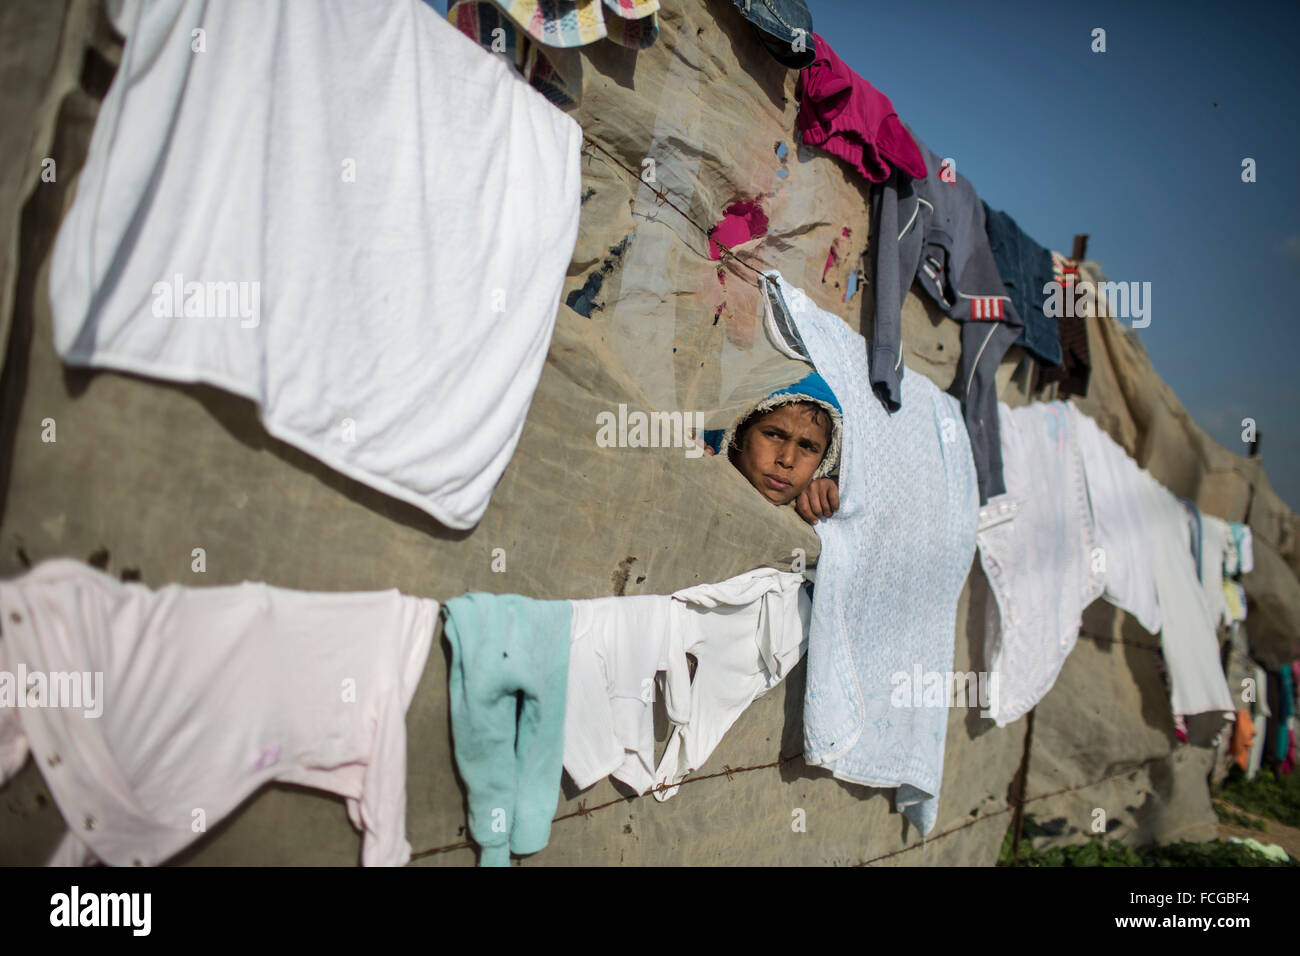 Gaza, Gaza Strip. 22nd Jan, 2016. A Palestinian boy peeks out through a hole in his family's tent in a poverty-stricken area of Beit Hanun town, in the northern Gaza Strip, on Jan 22, 2016. © Wissam Nassar/Xinhua/Alamy Live News Stock Photo